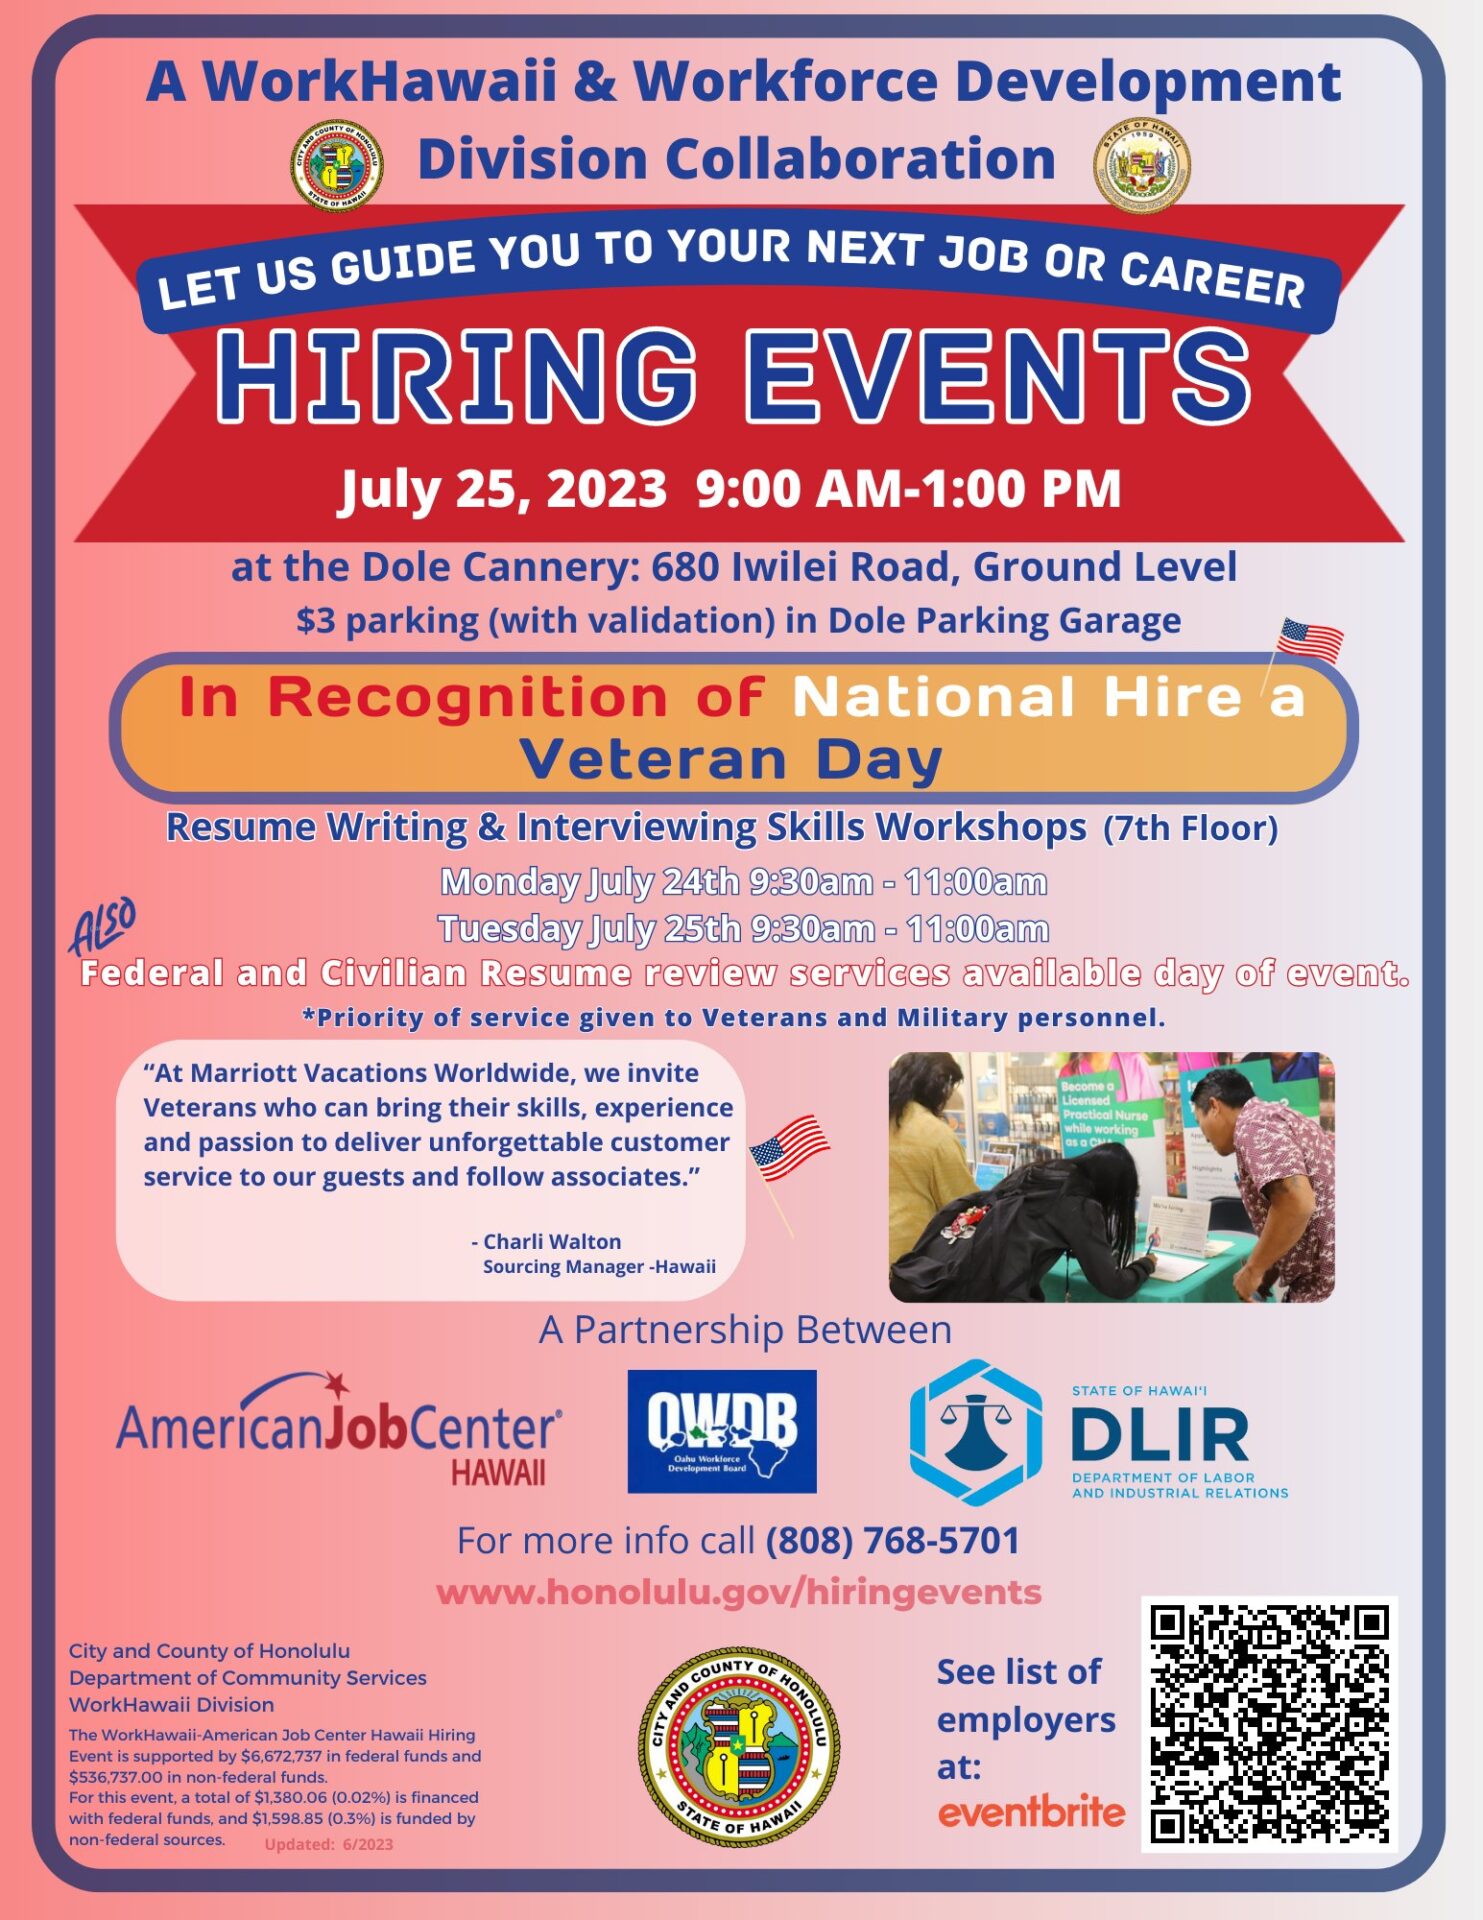 Flyer announcement for a hiring event taking place on July 25, 2023